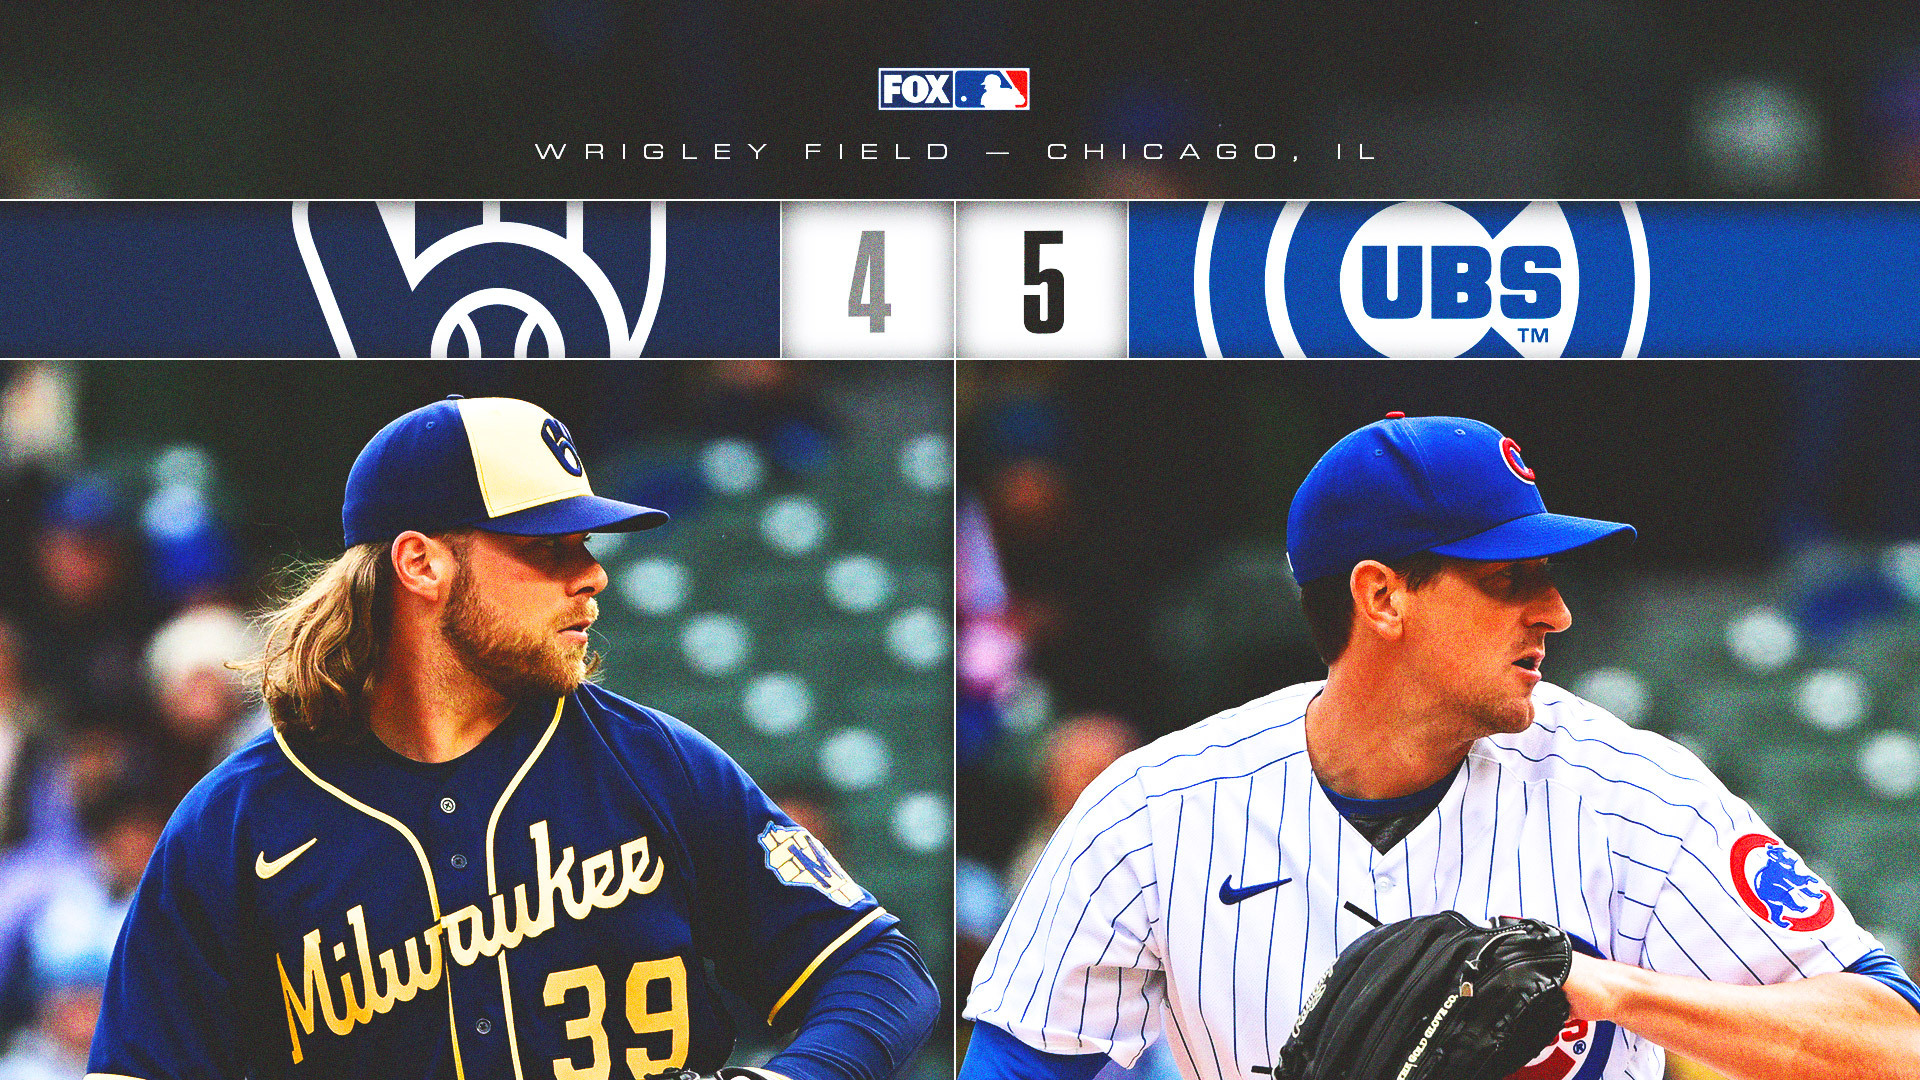 Milwaukee Brewers vs Chicago Cubs - April 07, 2022